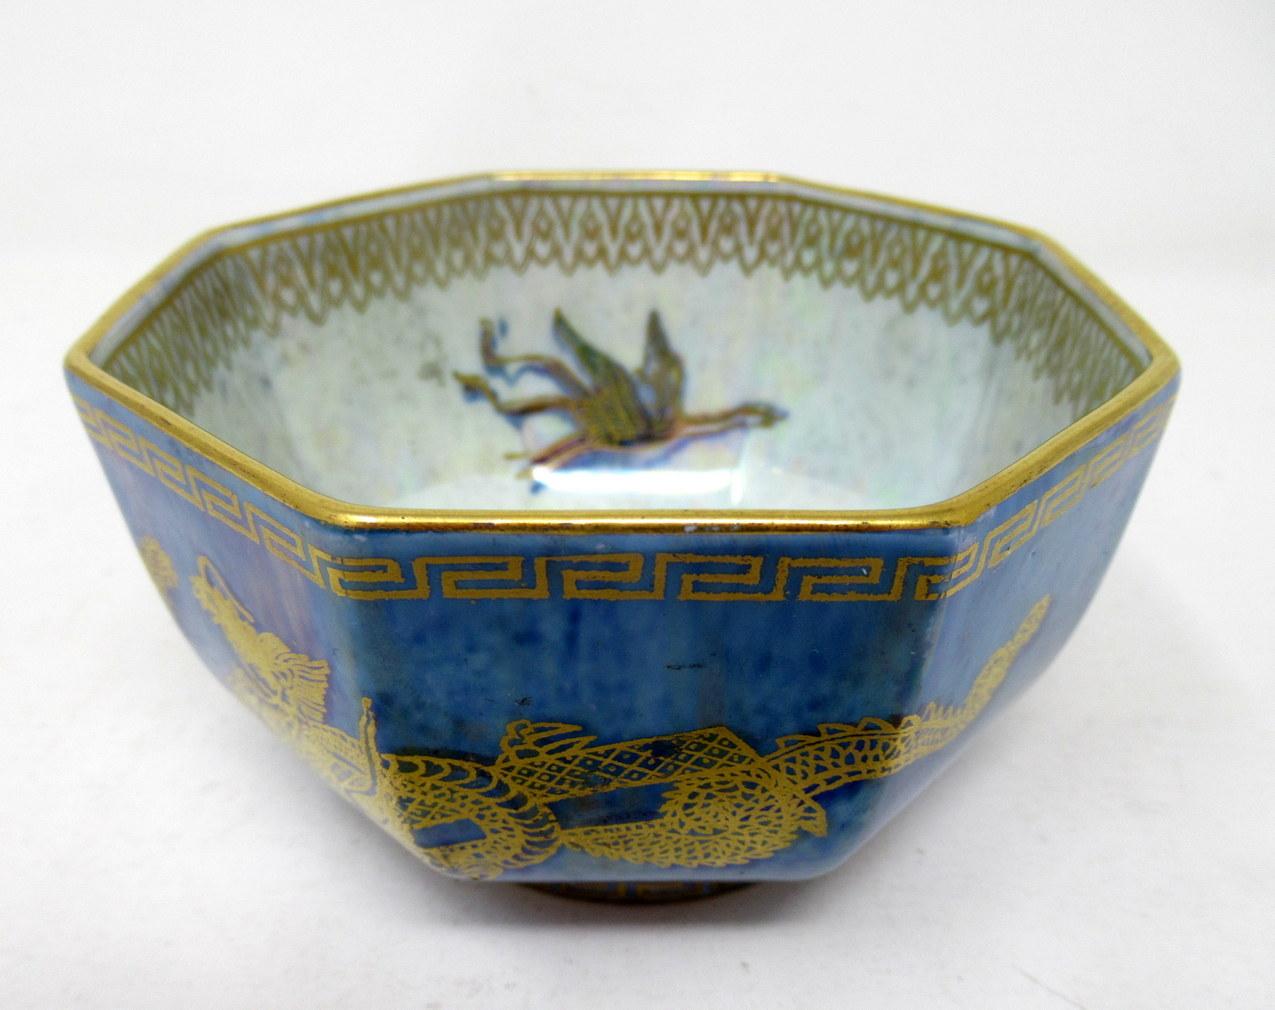 English Art Deco Wedgwood Celestial Chinese Dragon Lustre Ware Bowl Centerpiece, 1920s  